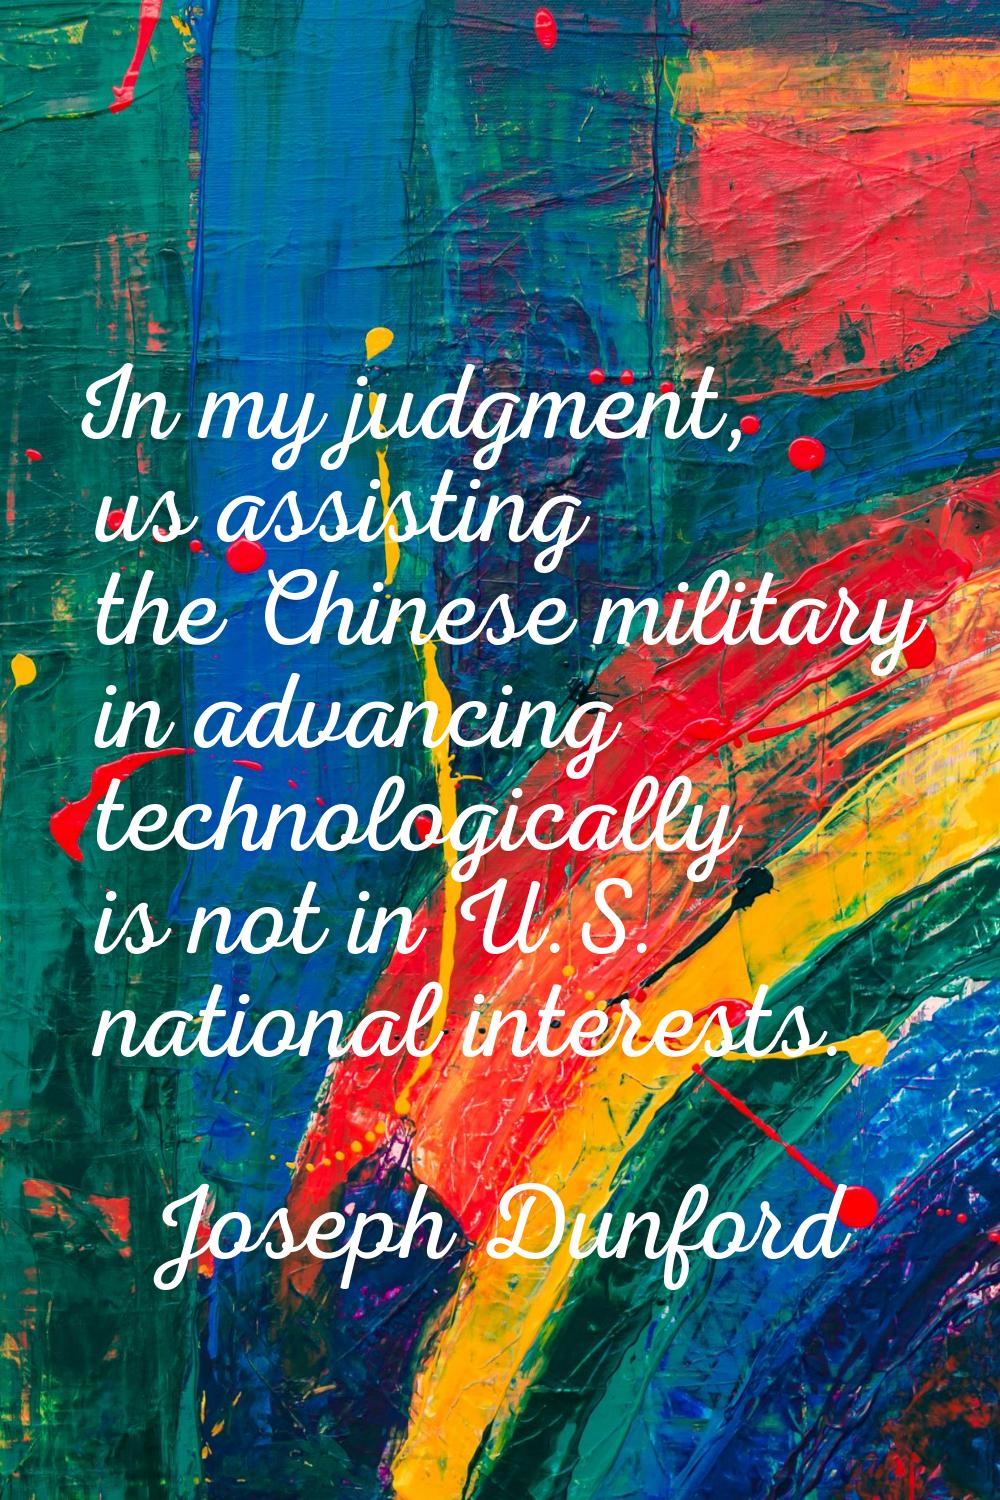 In my judgment, us assisting the Chinese military in advancing technologically is not in U.S. natio